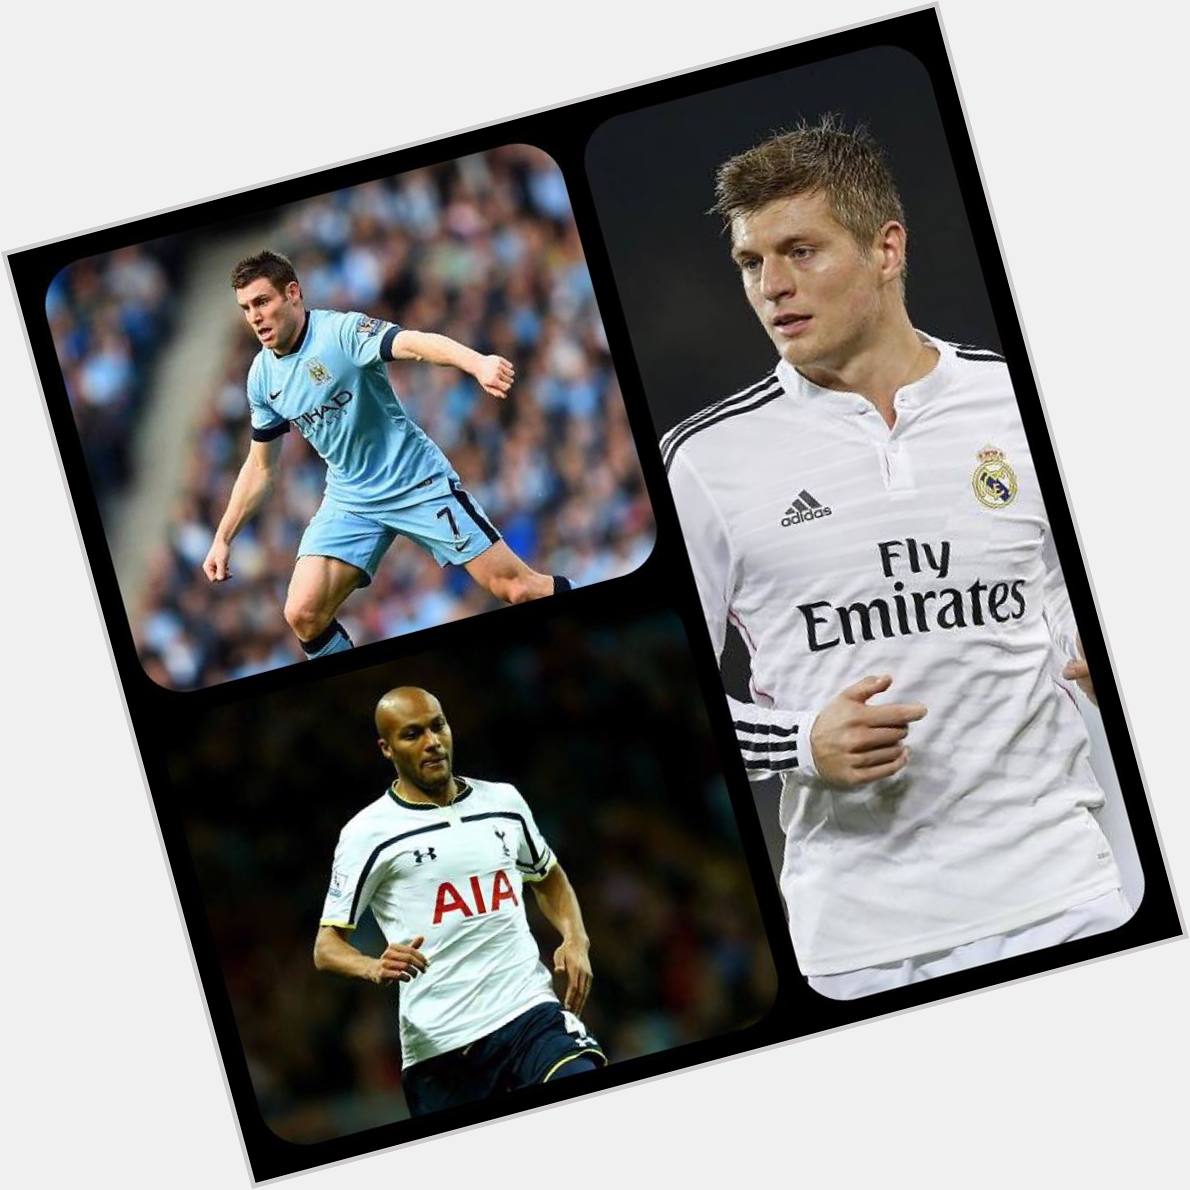 HAPPY BIRTHDAY! To Man City\s James Milner, Tottenham\s Younes Kaboul and Real Madrid\s Toni Kroos!  